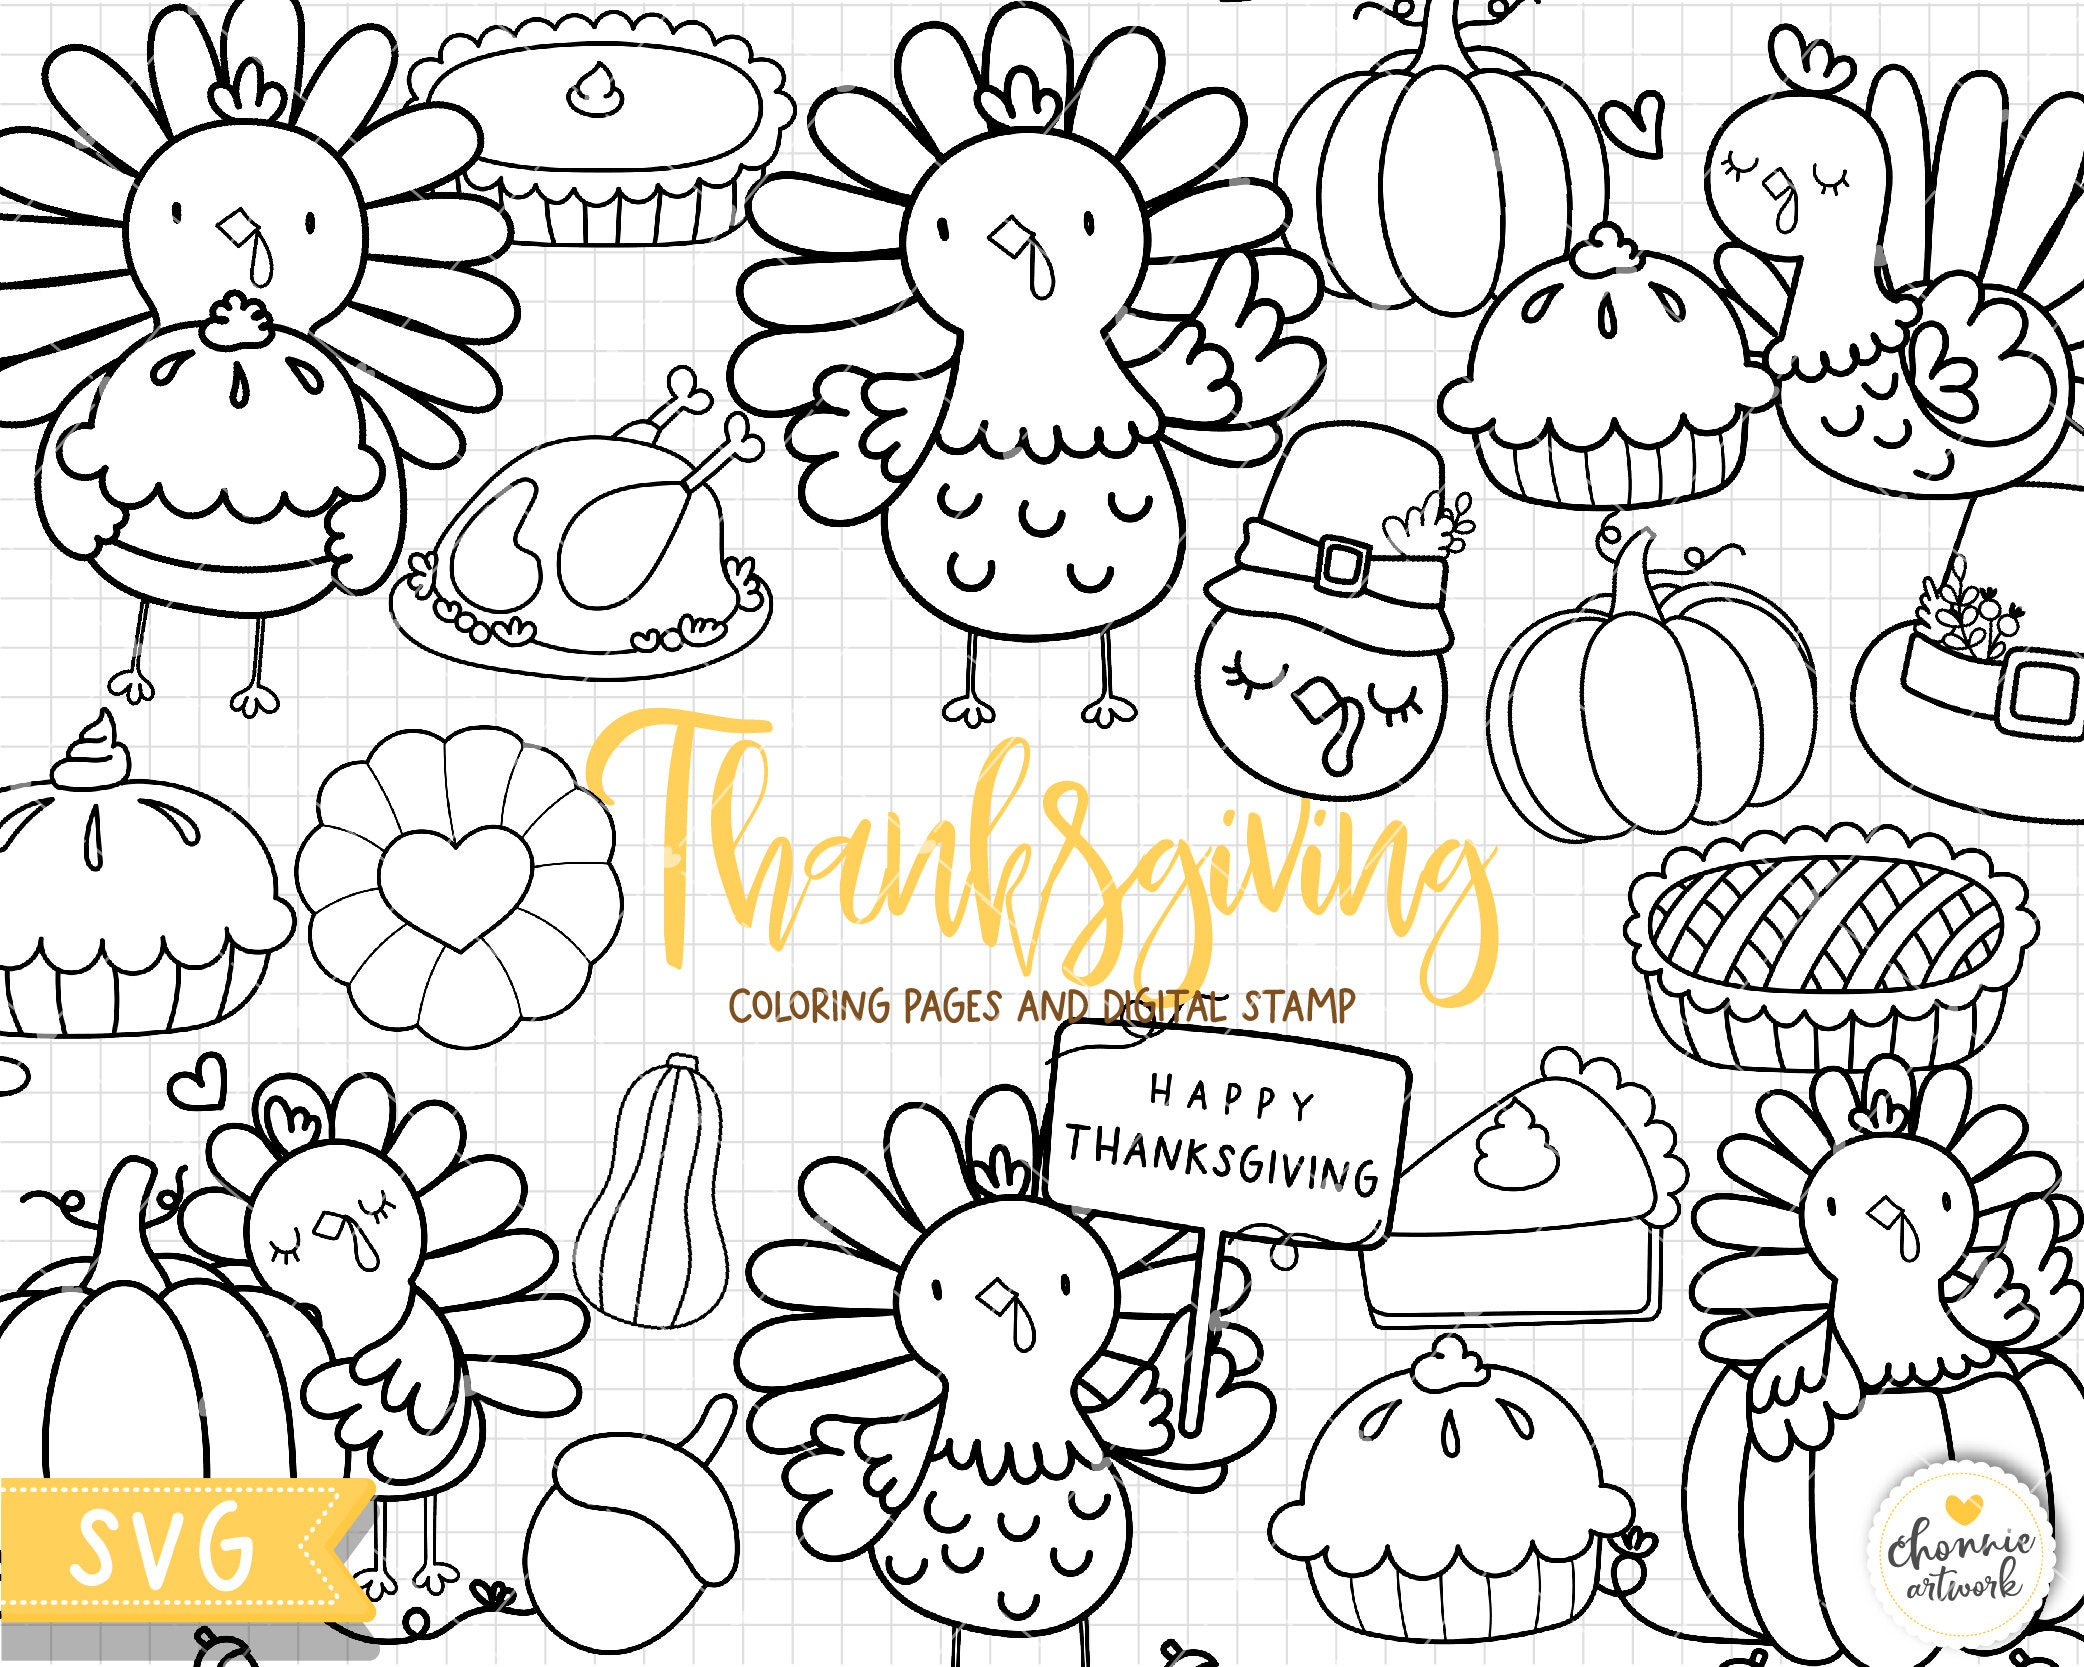 Happy thanksgiving with cute turkey coloring pages thanksgiving digital stamps thanksgiving svg thanksgiving clipart